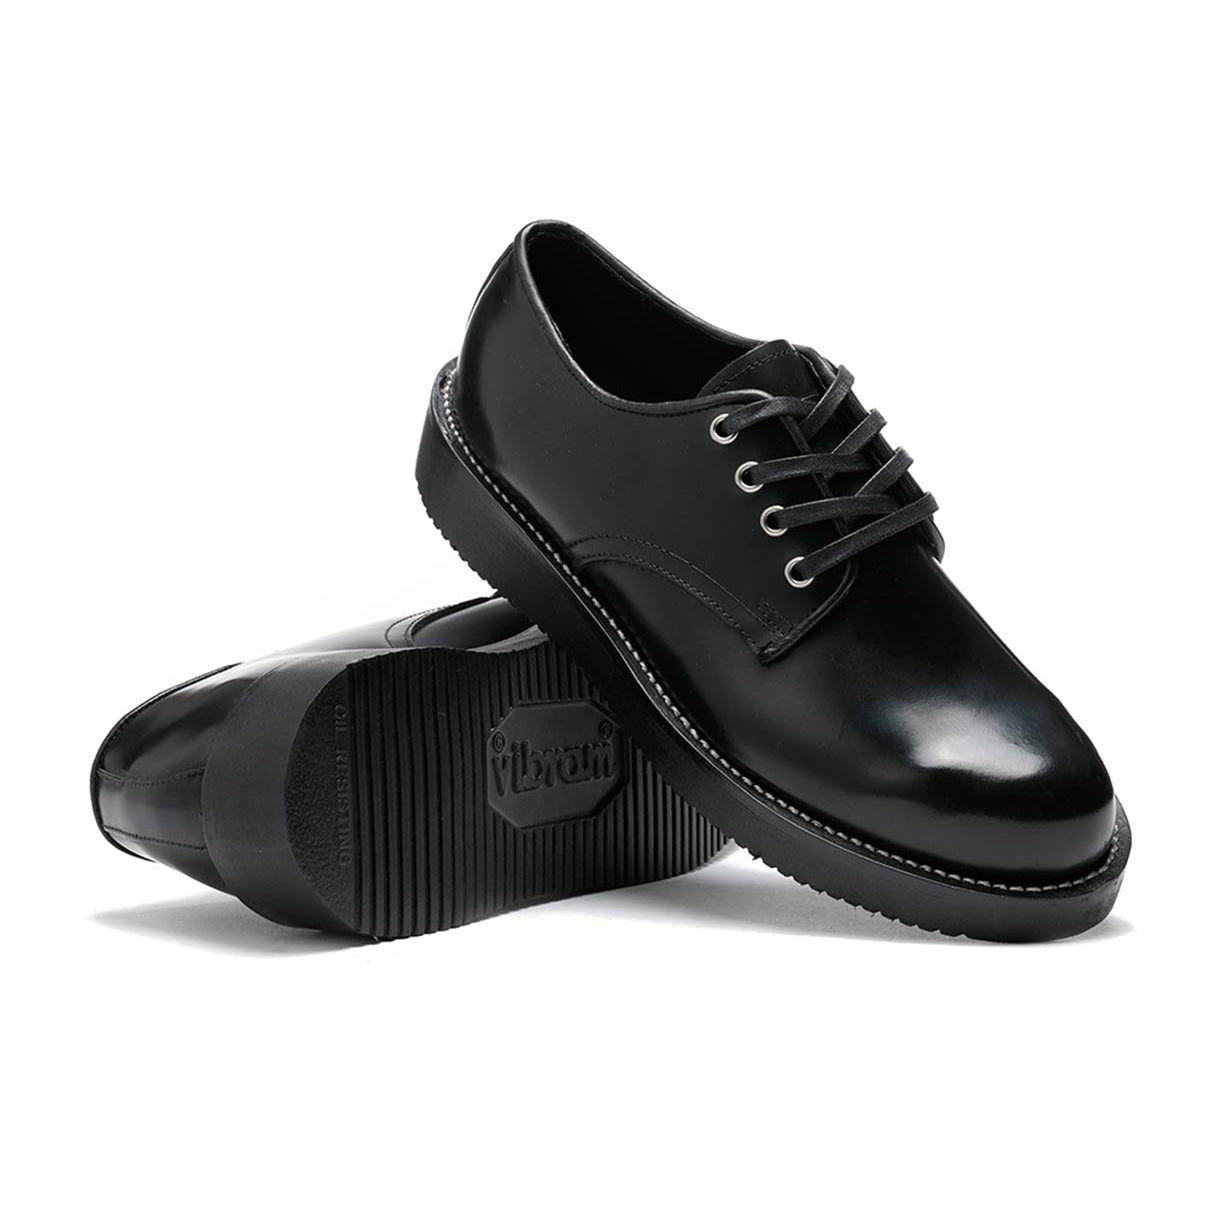 A pair of black leather Michael shoes with an oxford silhouette on a white background by Broken Homme.